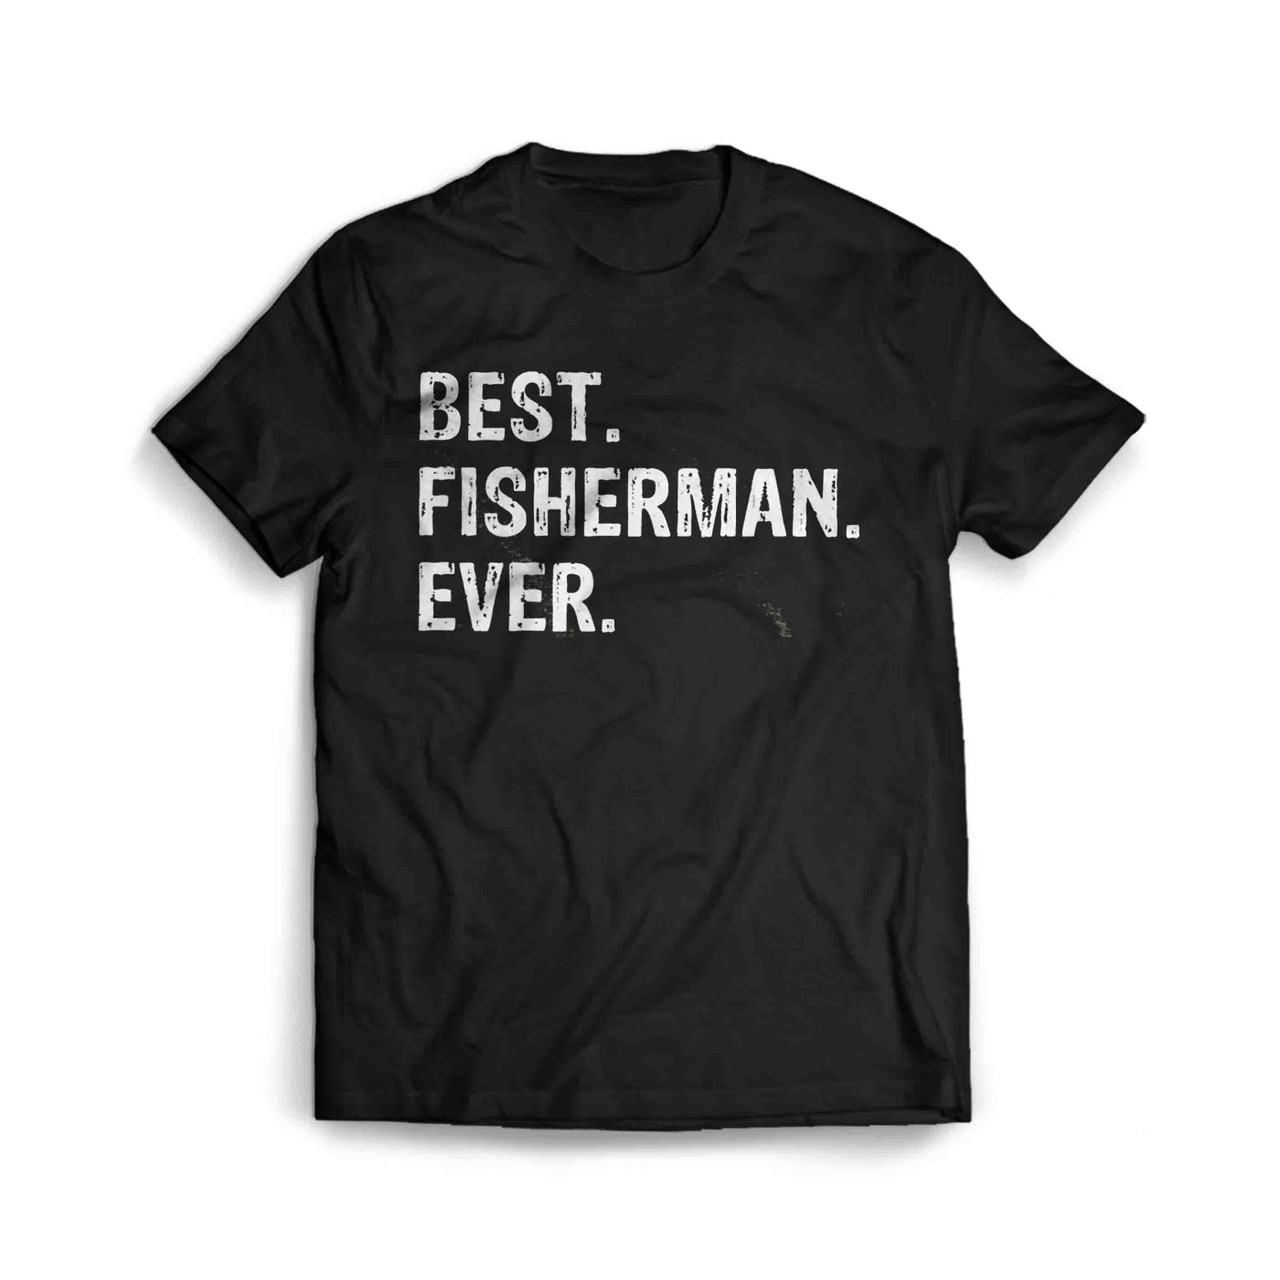 https://cdn11.bigcommerce.com/s-fbh9rcmv2i/images/stencil/1280x1280/products/116948/146705/Best_Fisherman_Ever_Funny_Gift_For_Dad_Fathers_Day_Pun_Jokes_Fishing_Ice_Fishing_Outdoor_Dad_Camping_Sport_Fish__86511.1645676379.jpg?c=1